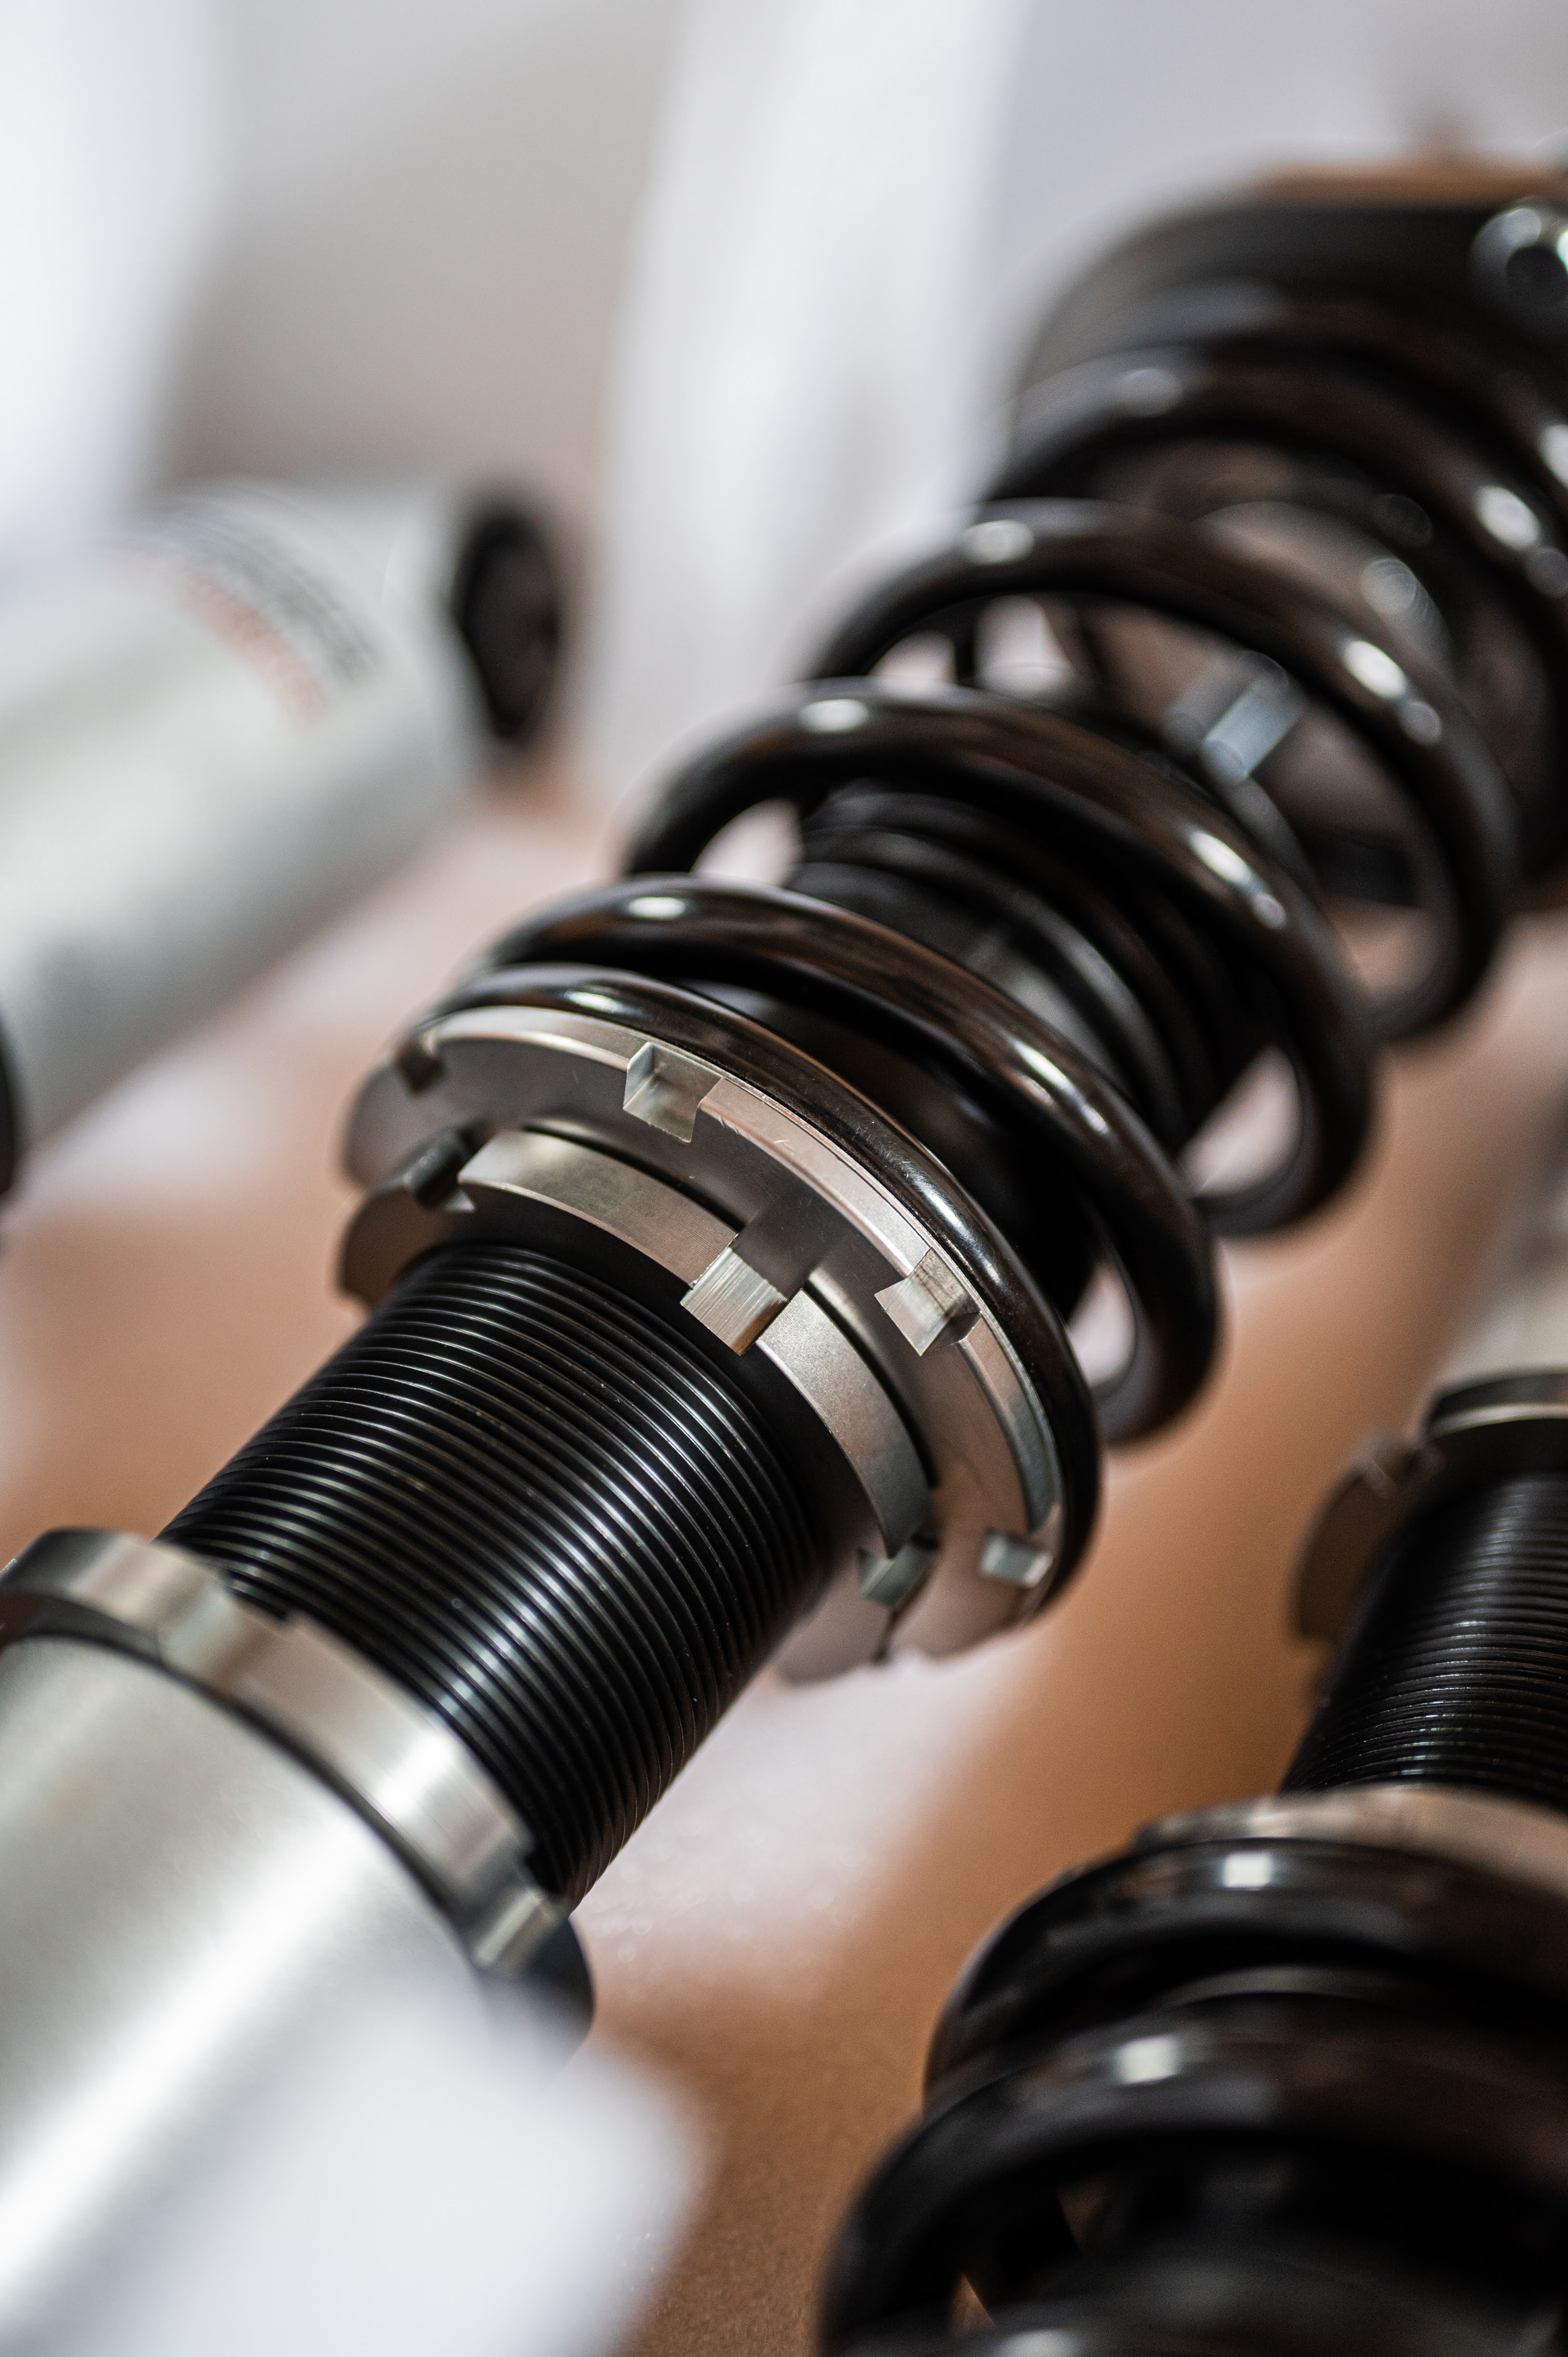 MaXpeedingRods Blog | An Automotive Blog from MaXpeedingRods - How to Choose Spring Rate for Coilovers